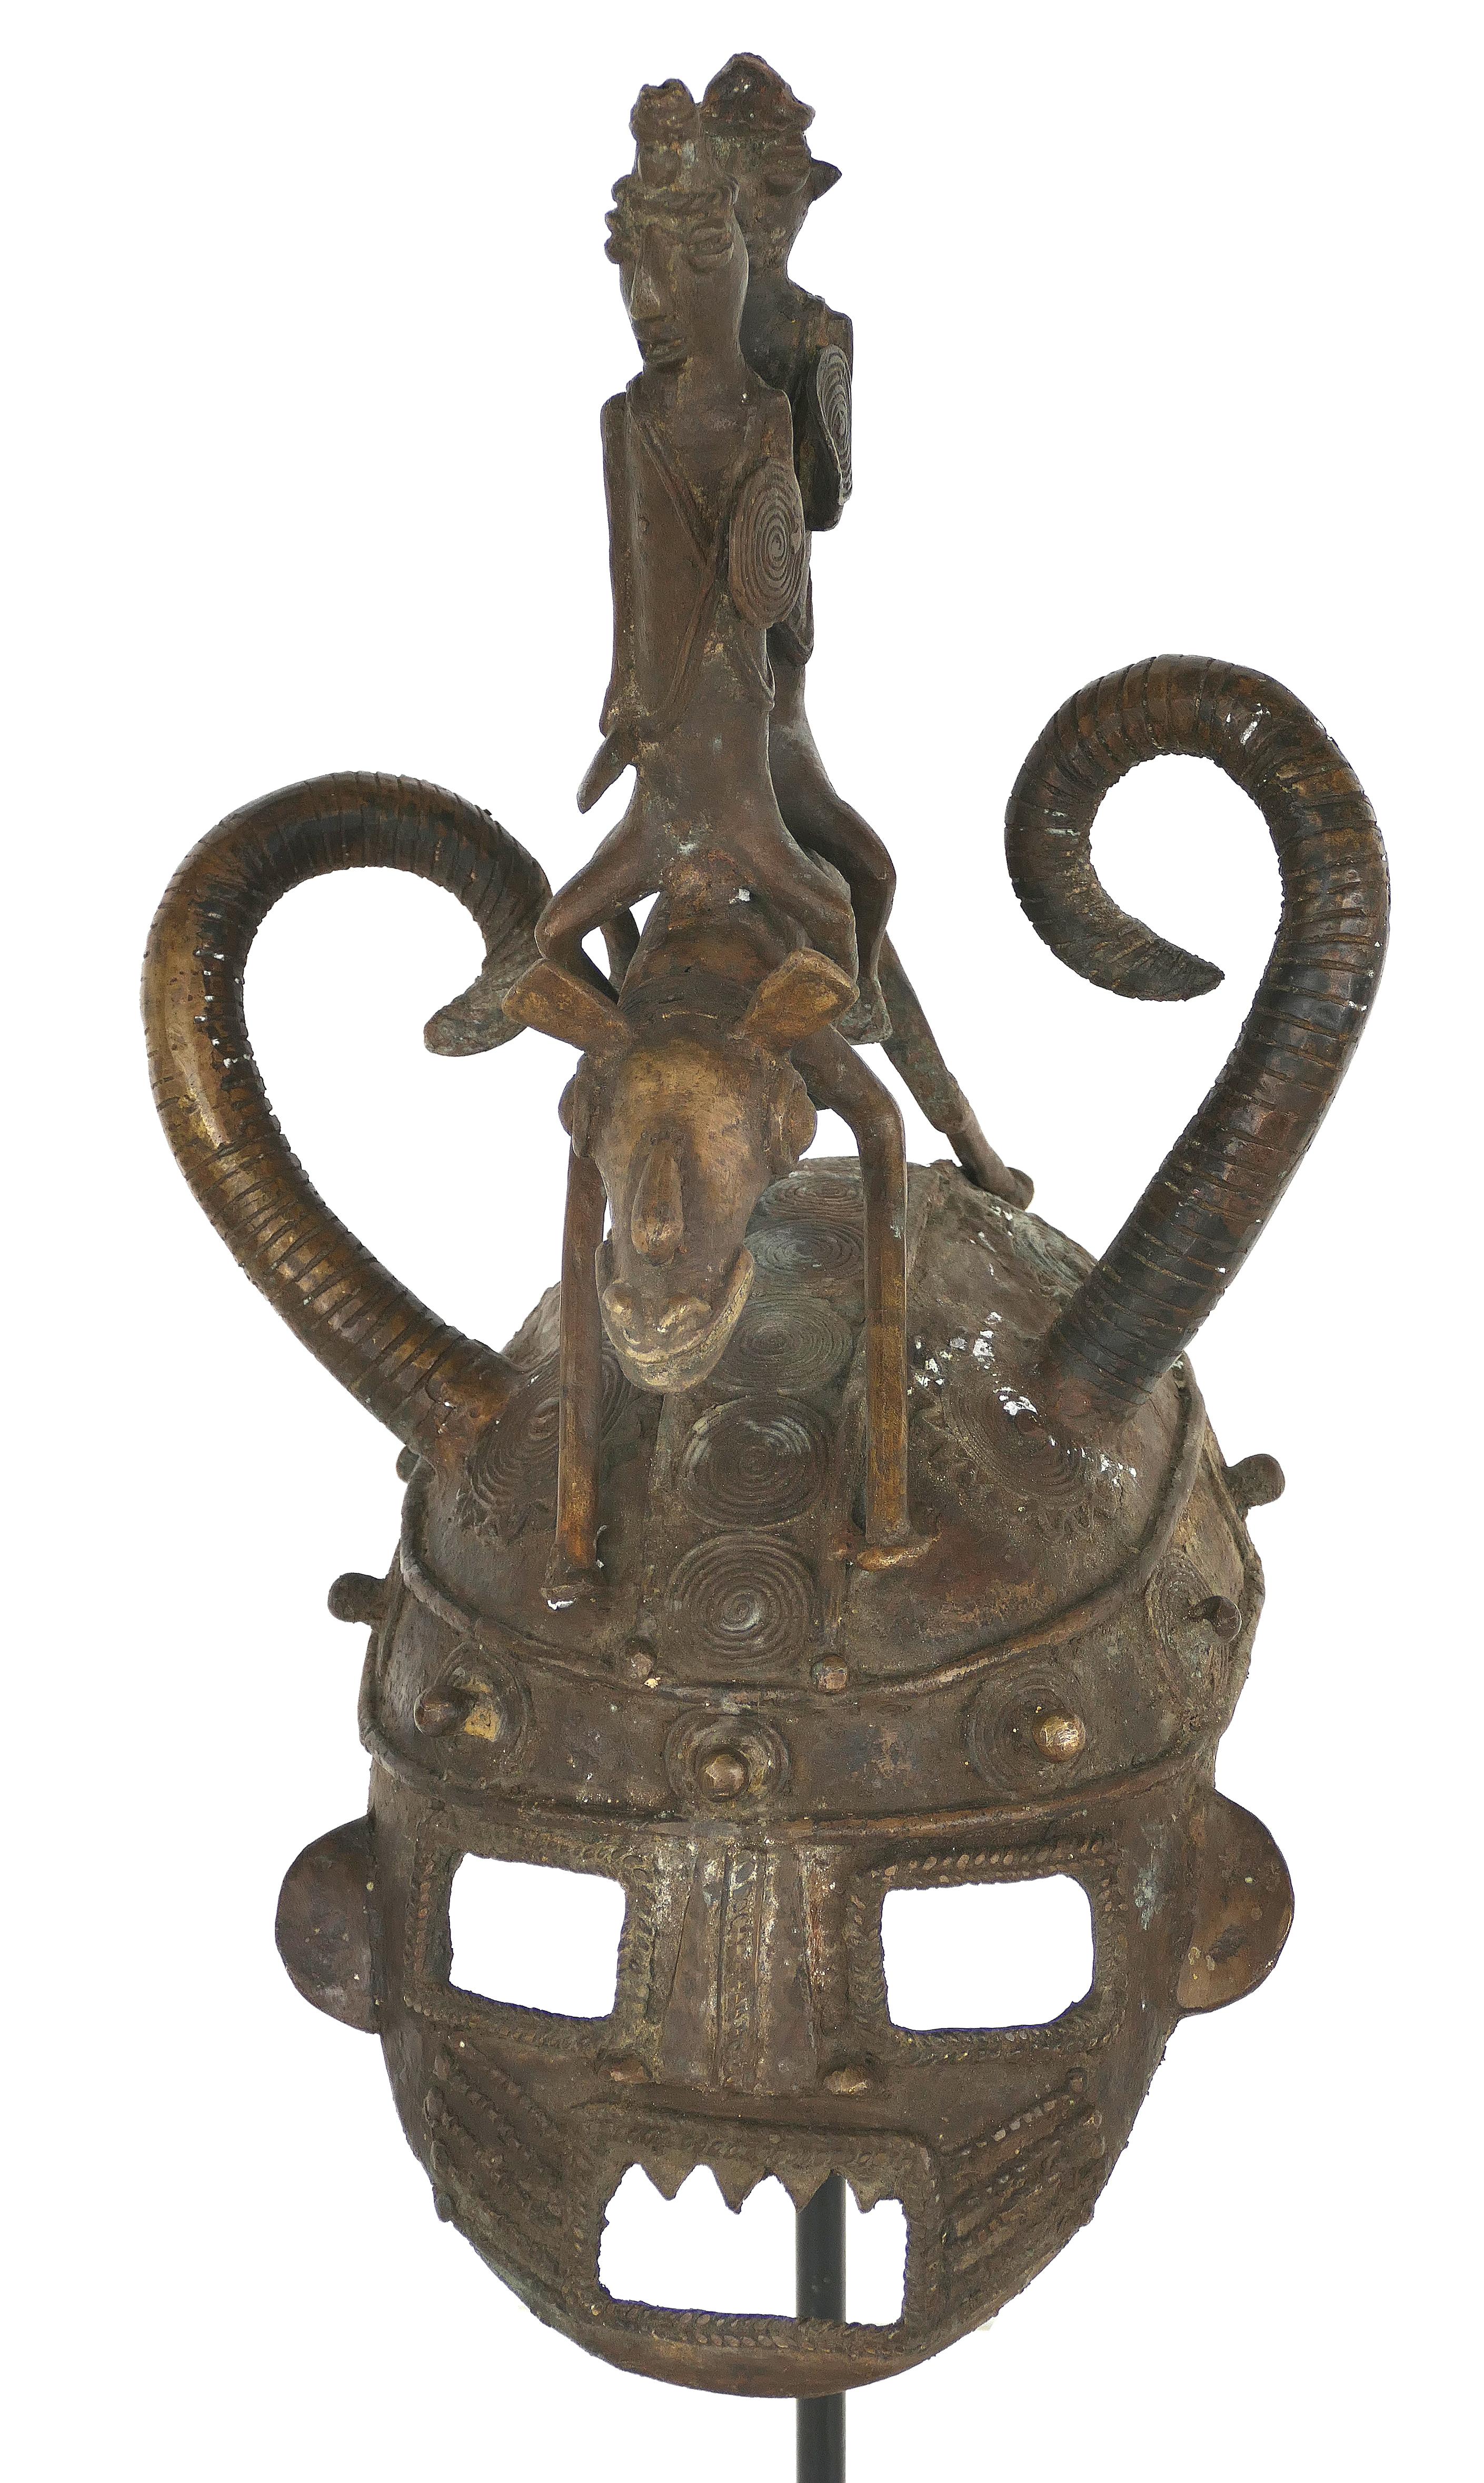 African Mali cast bronze figural helmet on stand, 20th century

Offered for sale is a mid-20th century African lost wax cast bronze figural helmet on a stand from Mali. Mali, officially the Republic of Mali is a landlocked country in West Africa.